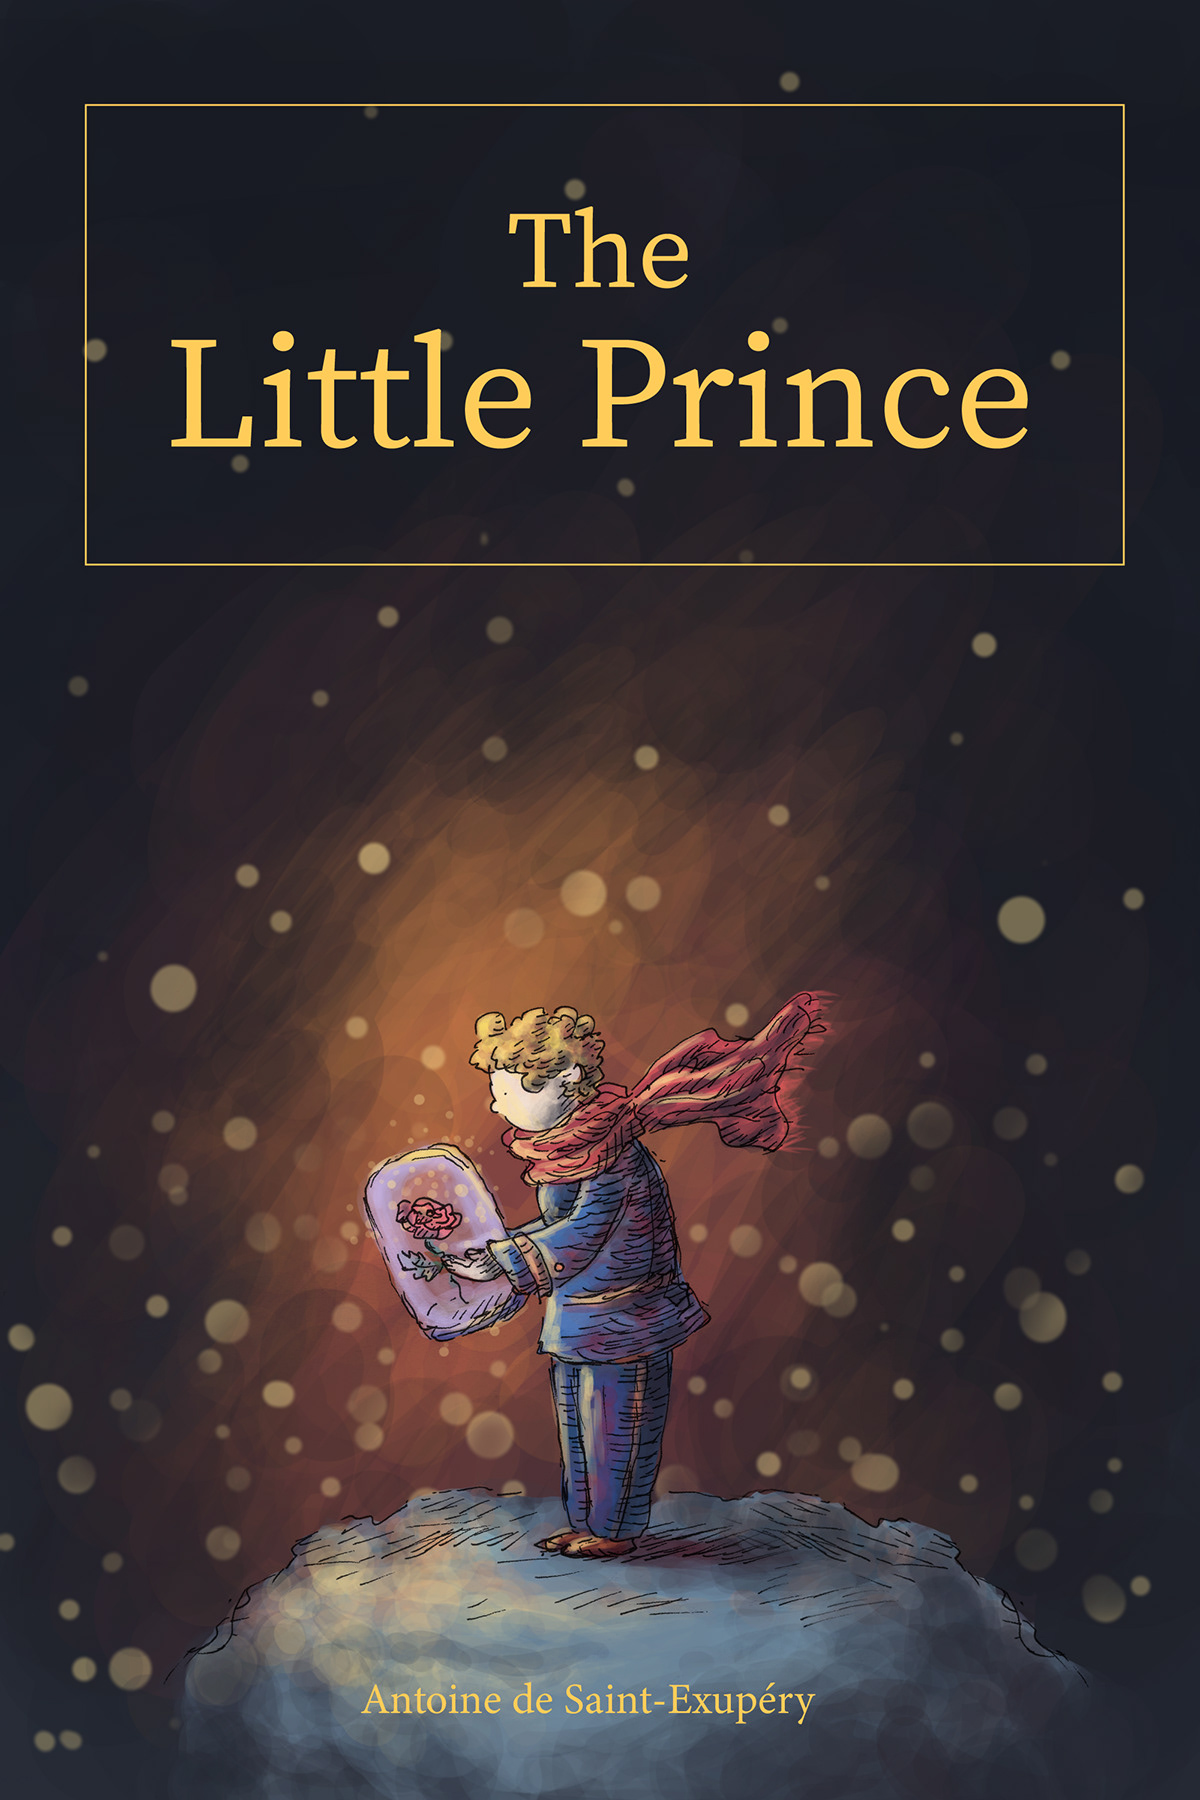 book review about little prince